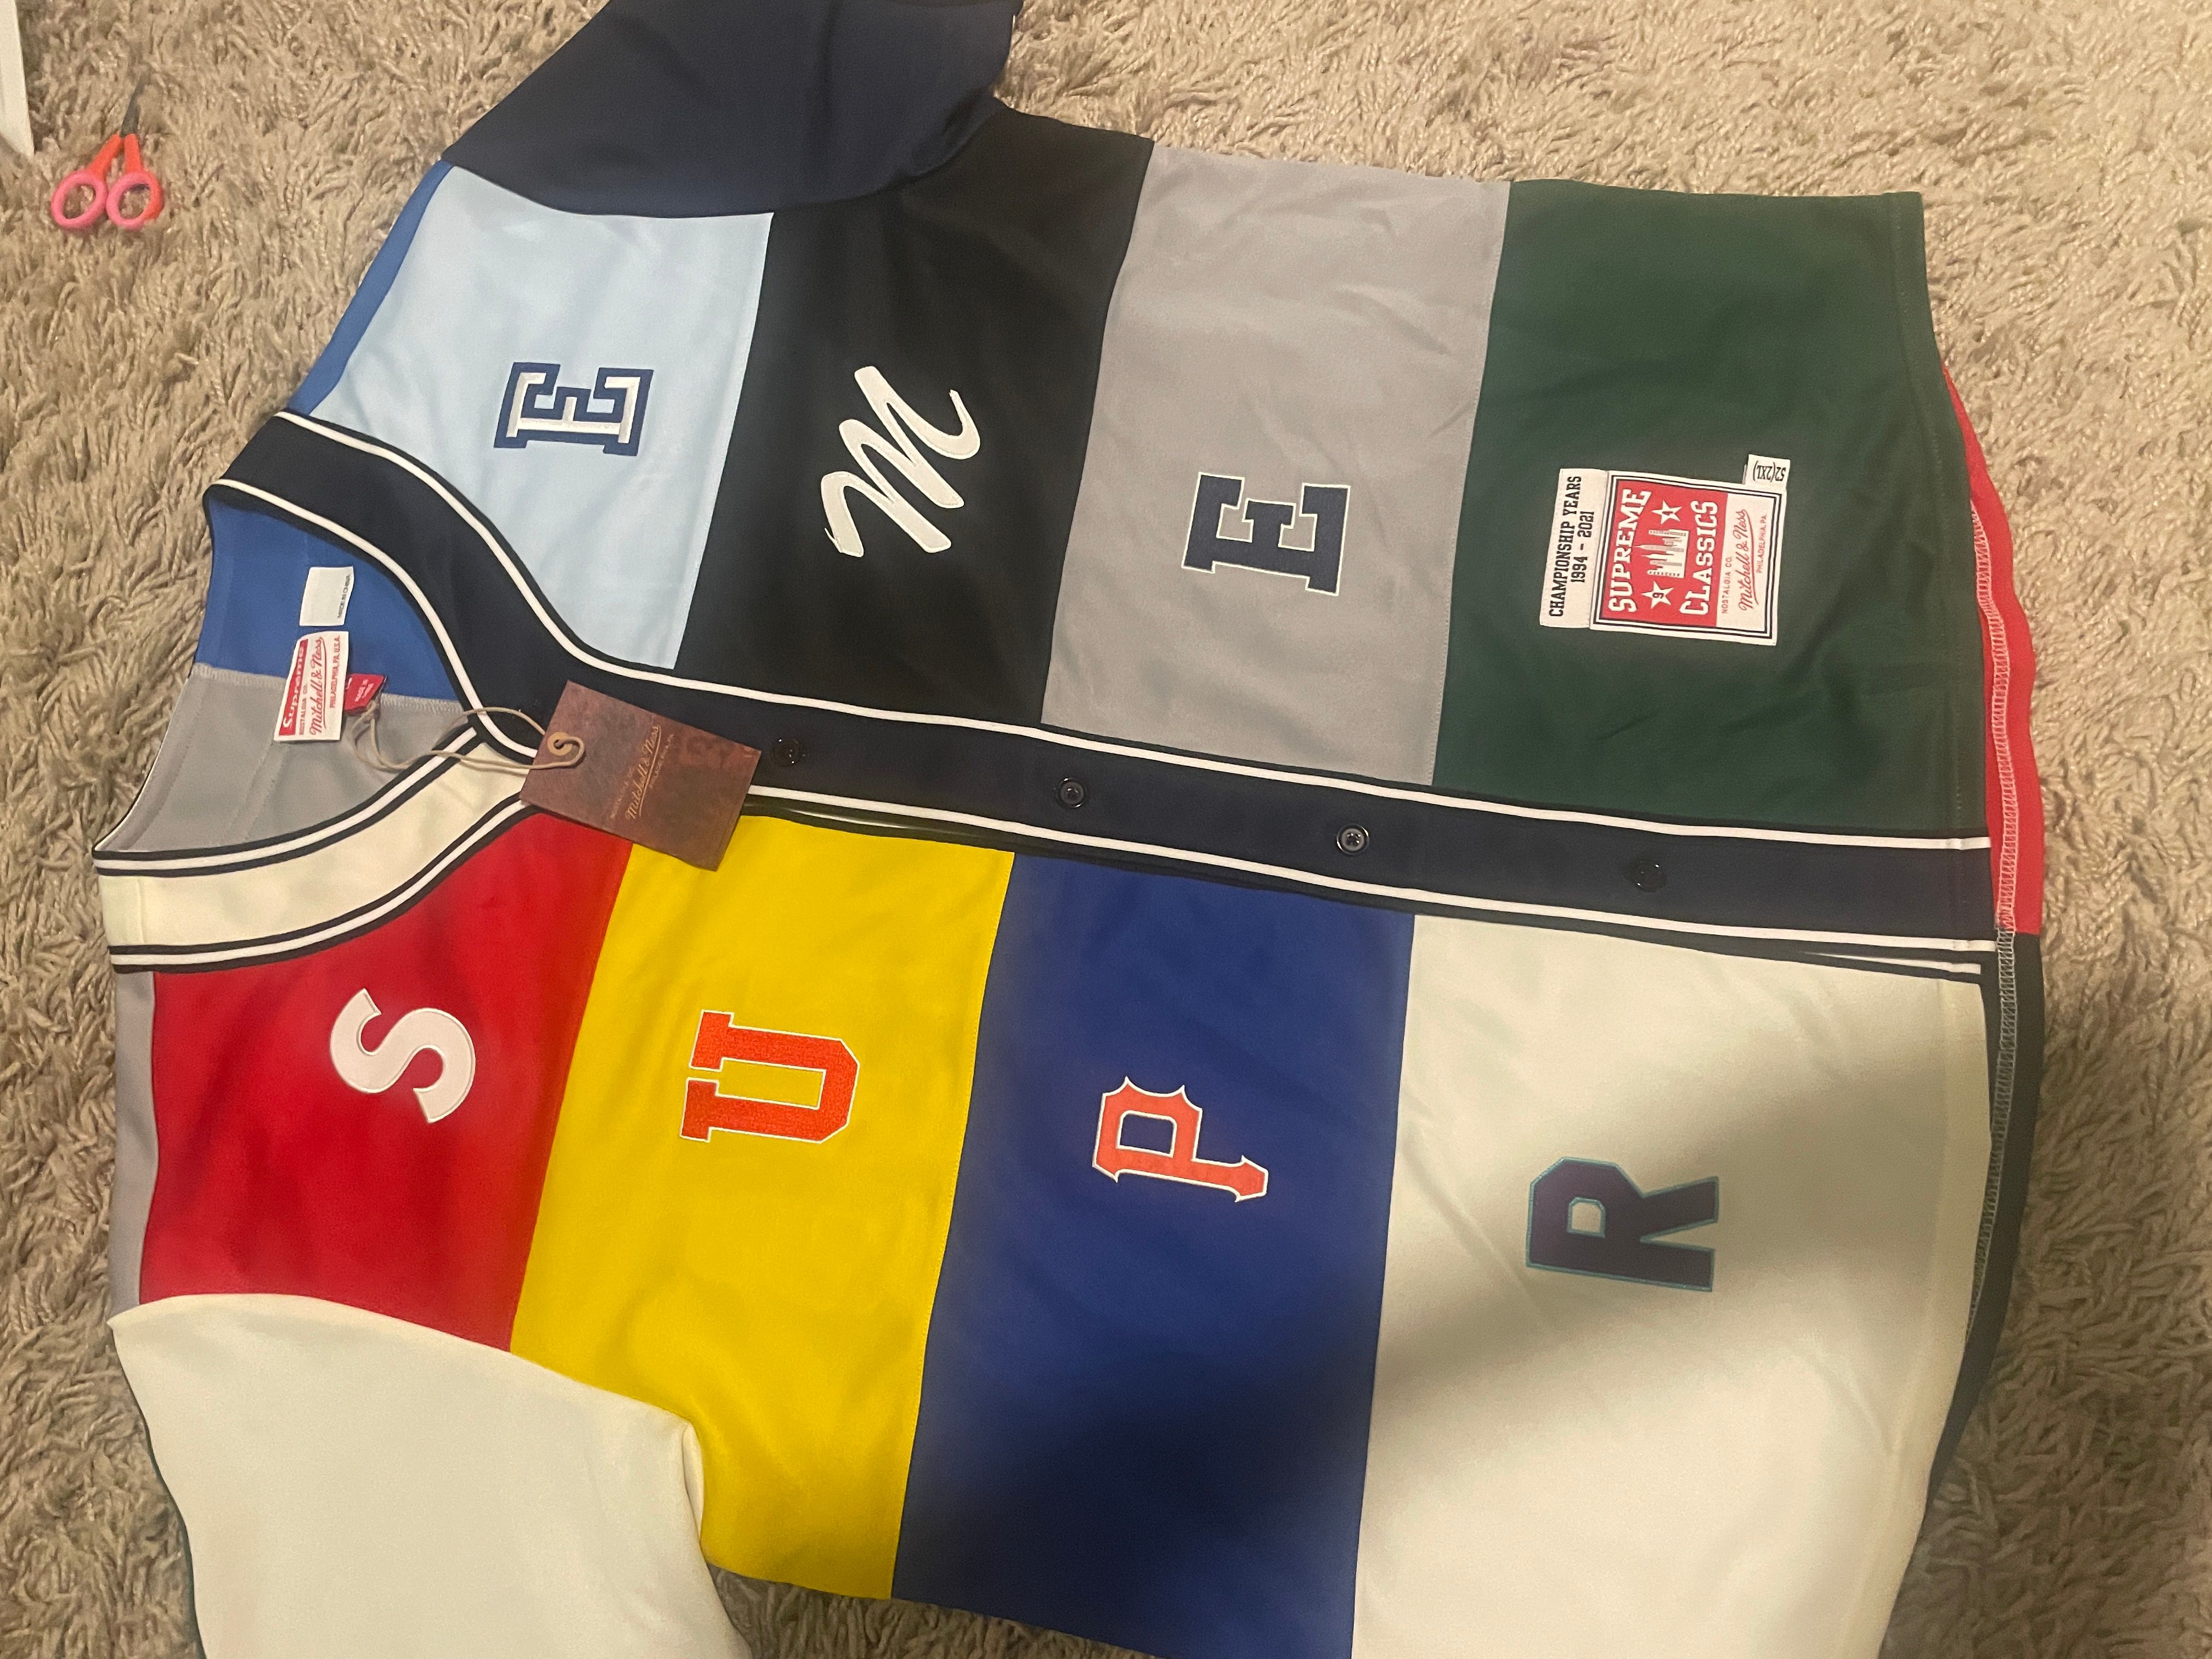 Supreme®/Mitchell & Ness® Patchwork Baseball Jersey - Fall/Winter 2021  Preview – Supreme